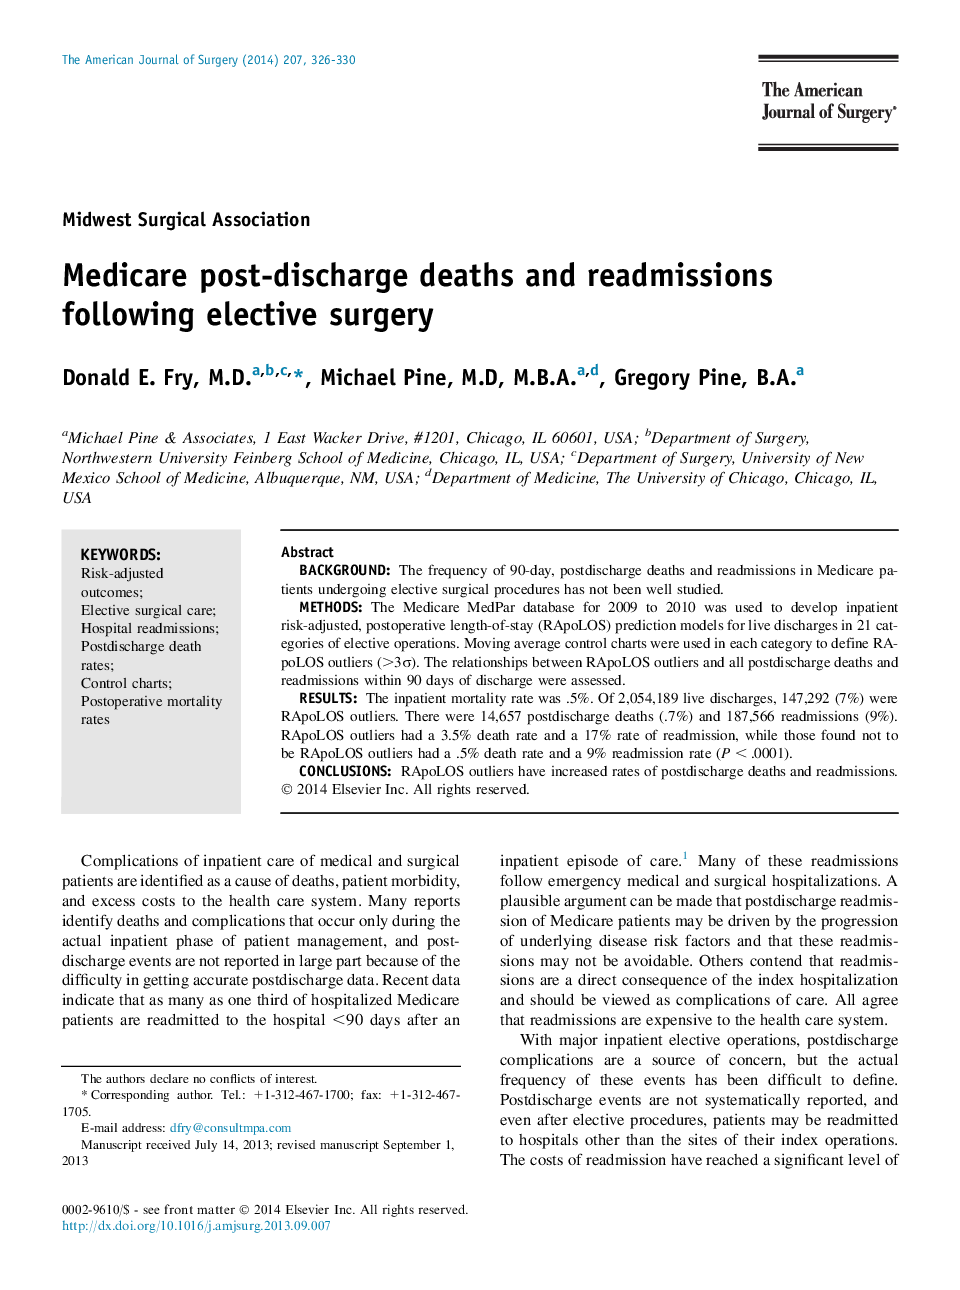 Medicare post-discharge deaths and readmissions following elective surgery 